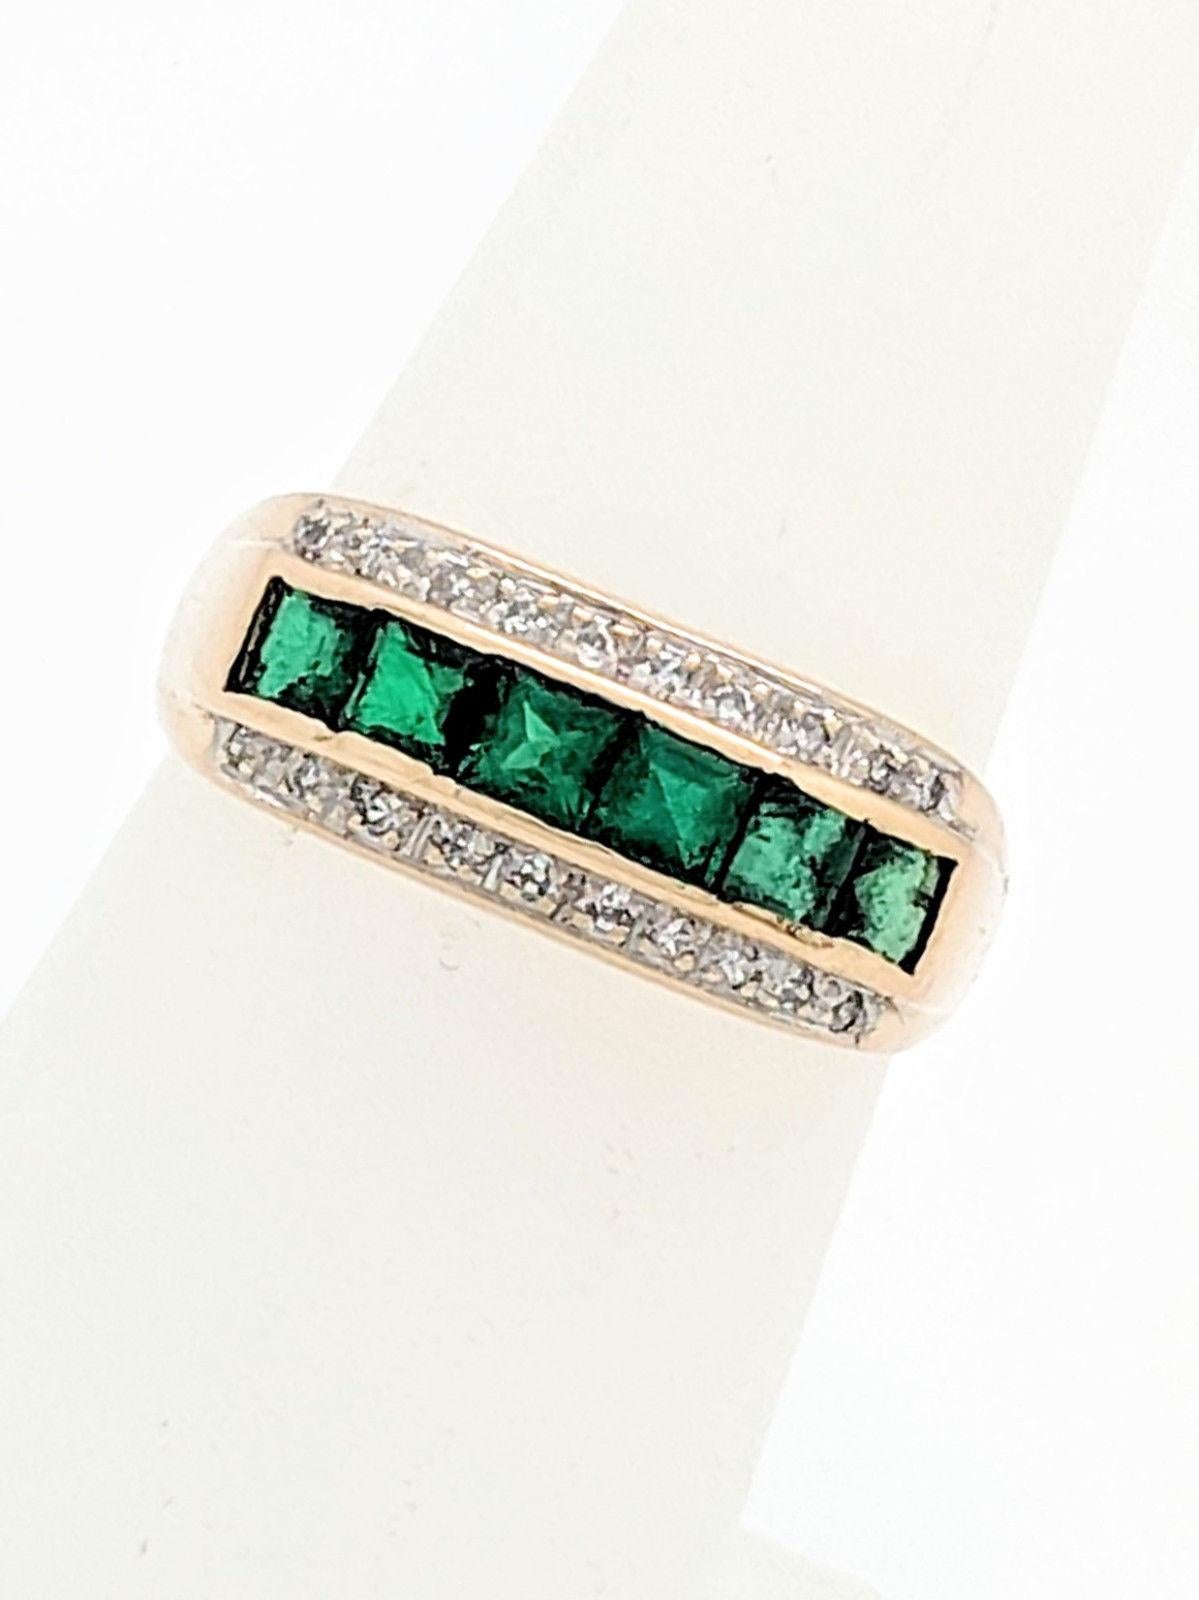 18K Yellow Gold Emerald & Diamond Ring

You are viewing a beautiful emerald and diamond ring. The setting is crafted from 18k yellow gold and weighs 4.2 grams. It features (6) .125 natural princess cut emeralds and (20) .005ct natural round